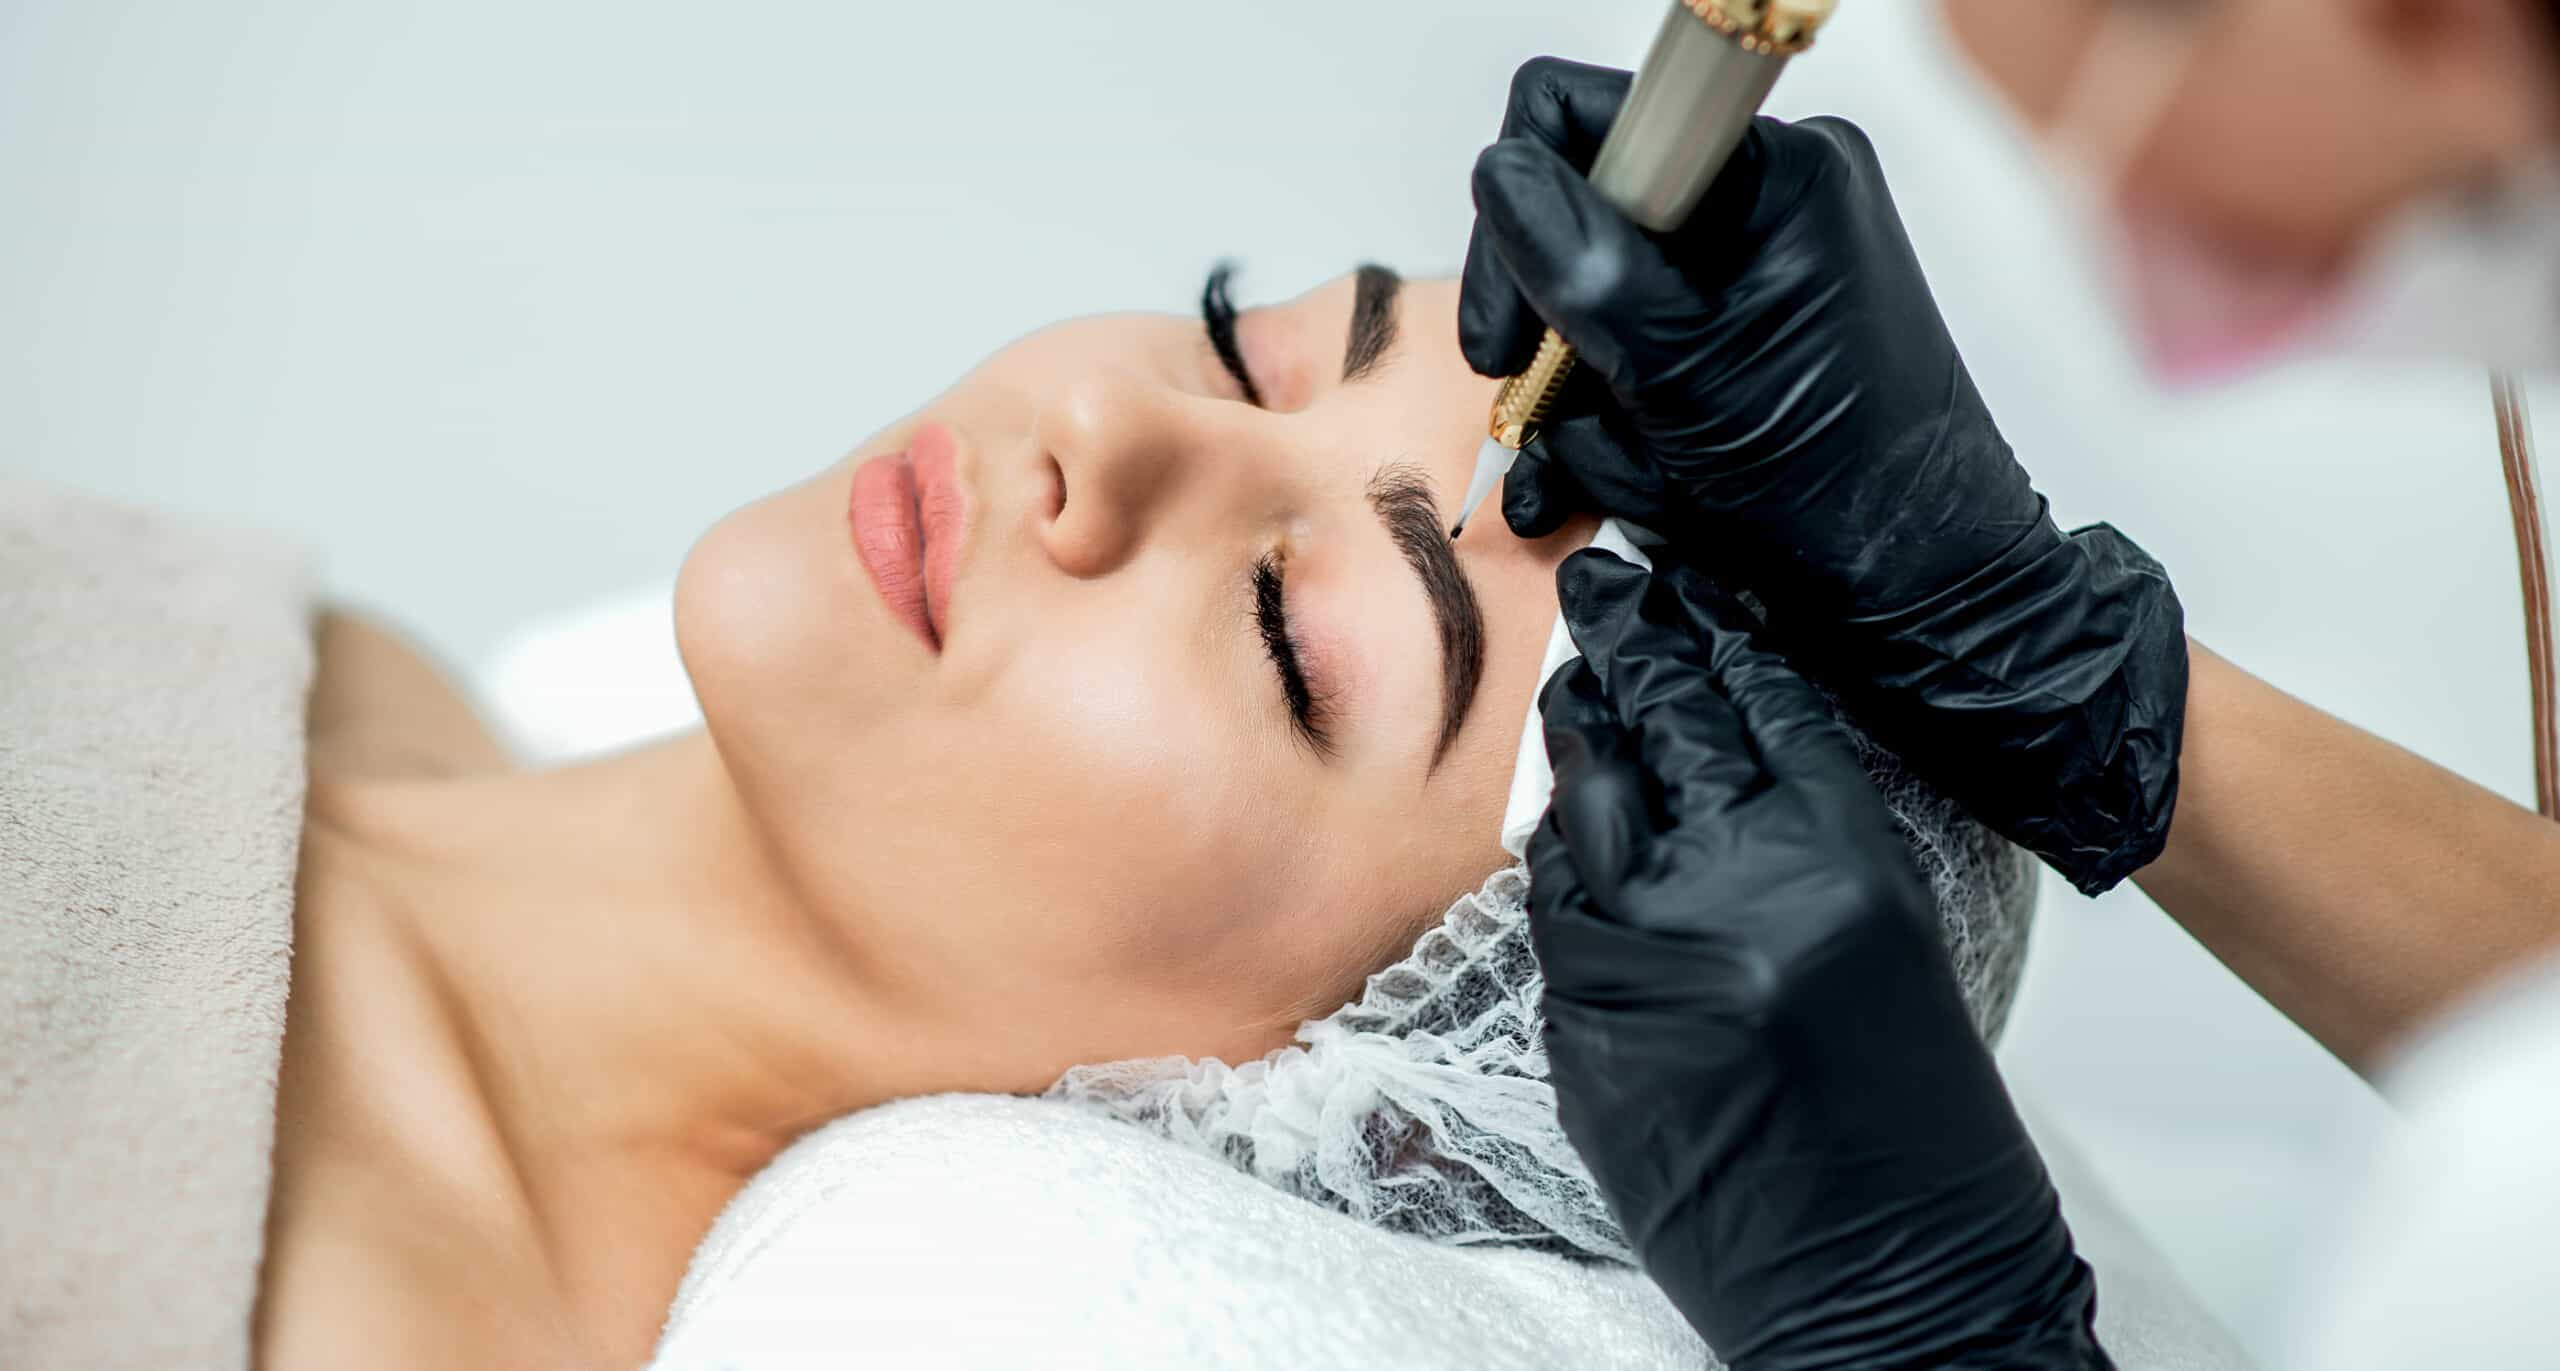 A woman is wrapped in a towel and wearing a hair net while she lays still getting her eyebrows tattooed.